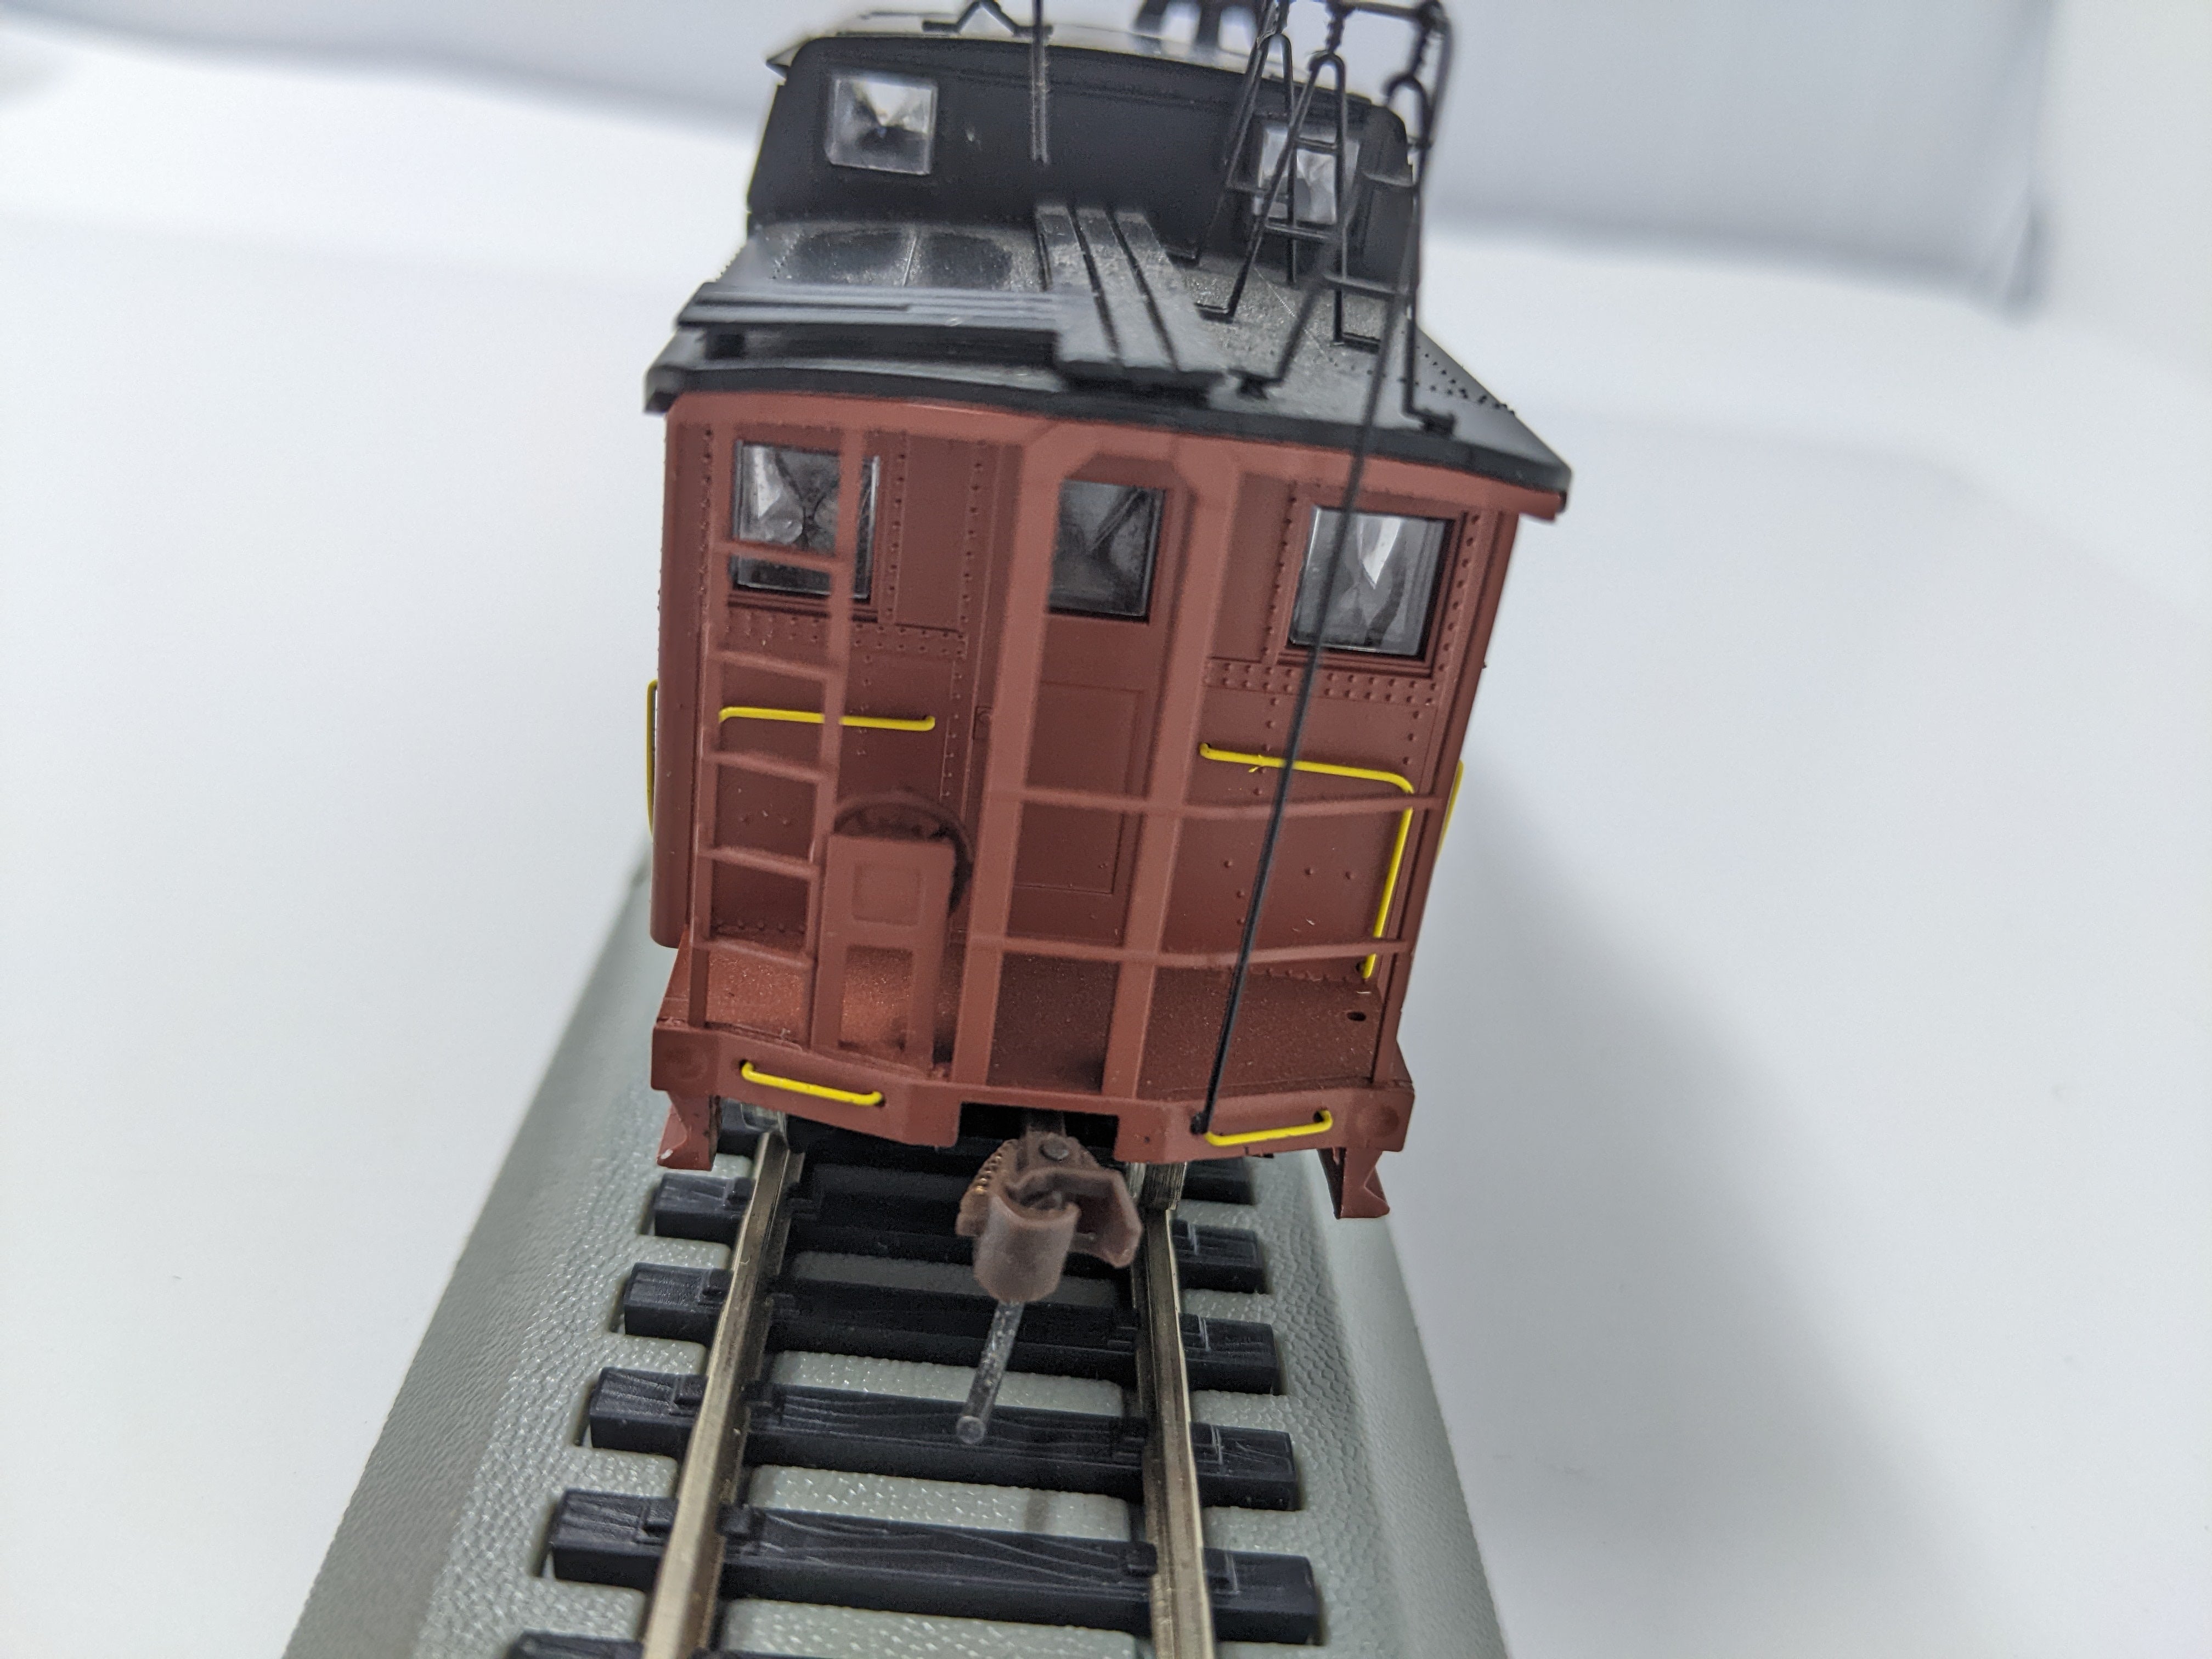 USED Bowser 41685 HO Scale, N5B Caboose with Trainphone, Pennsylvania #477776, Shadow Keystone